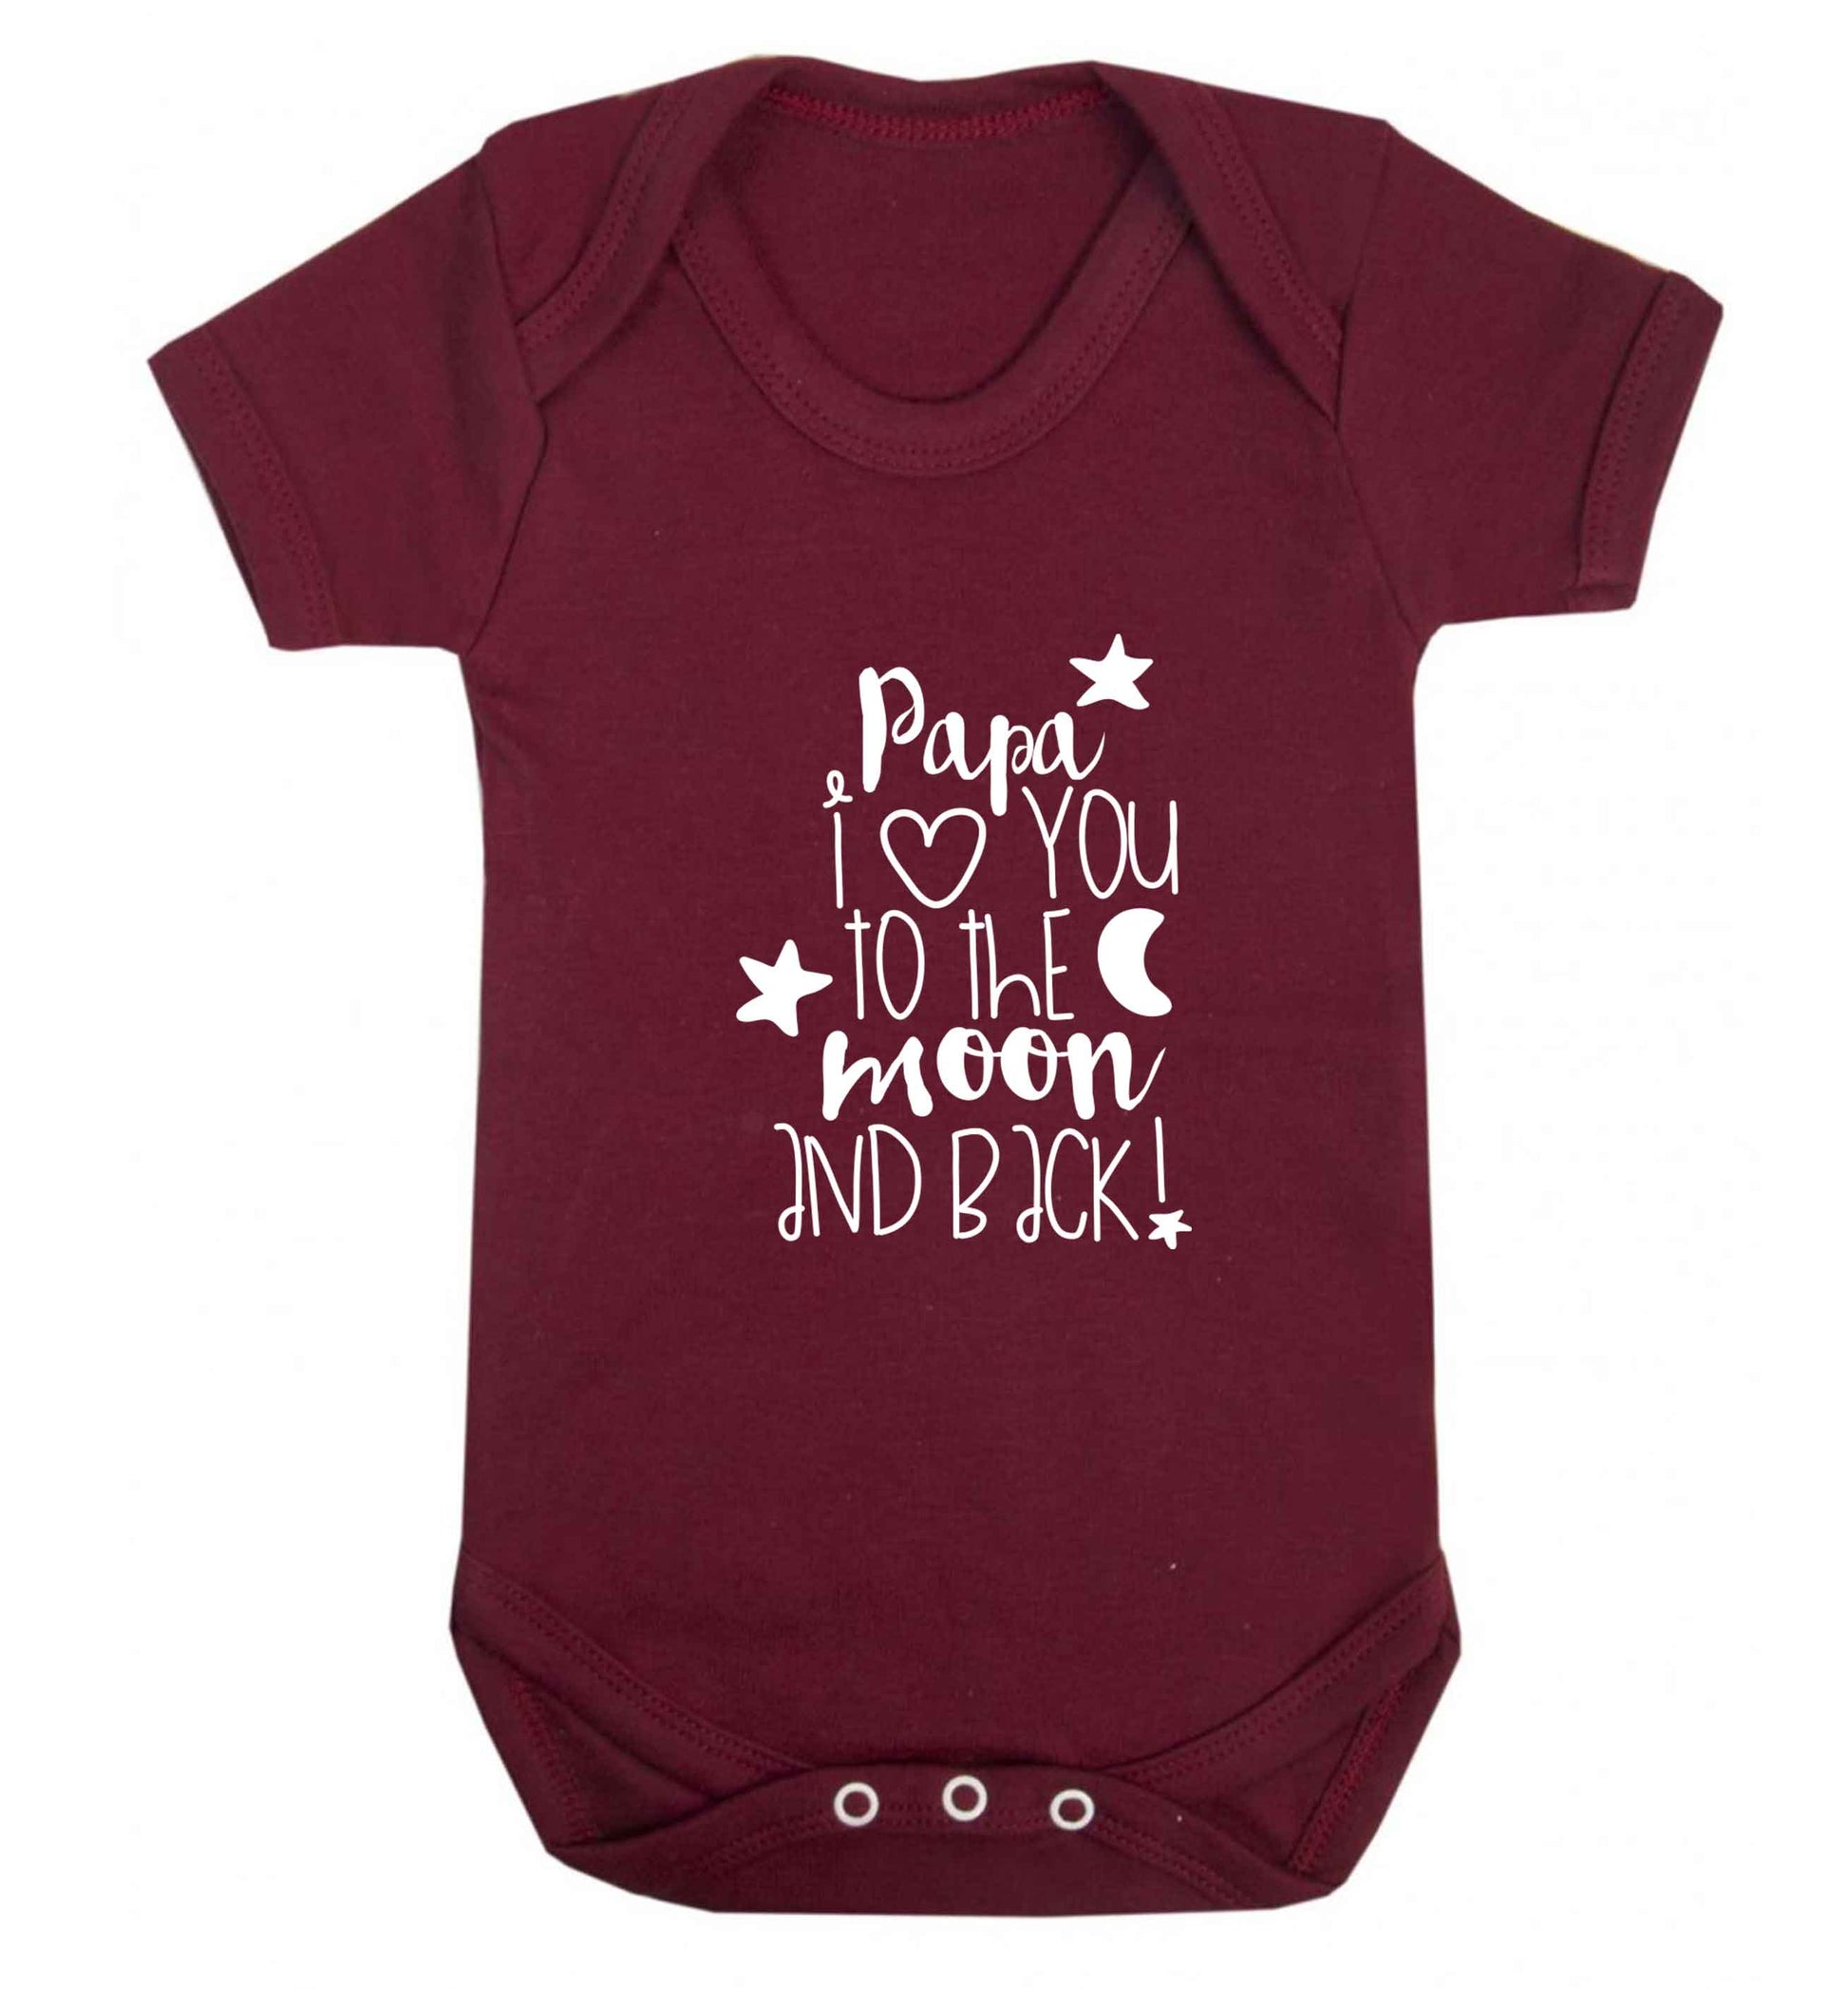 Papa I love you to the moon and back baby vest maroon 18-24 months